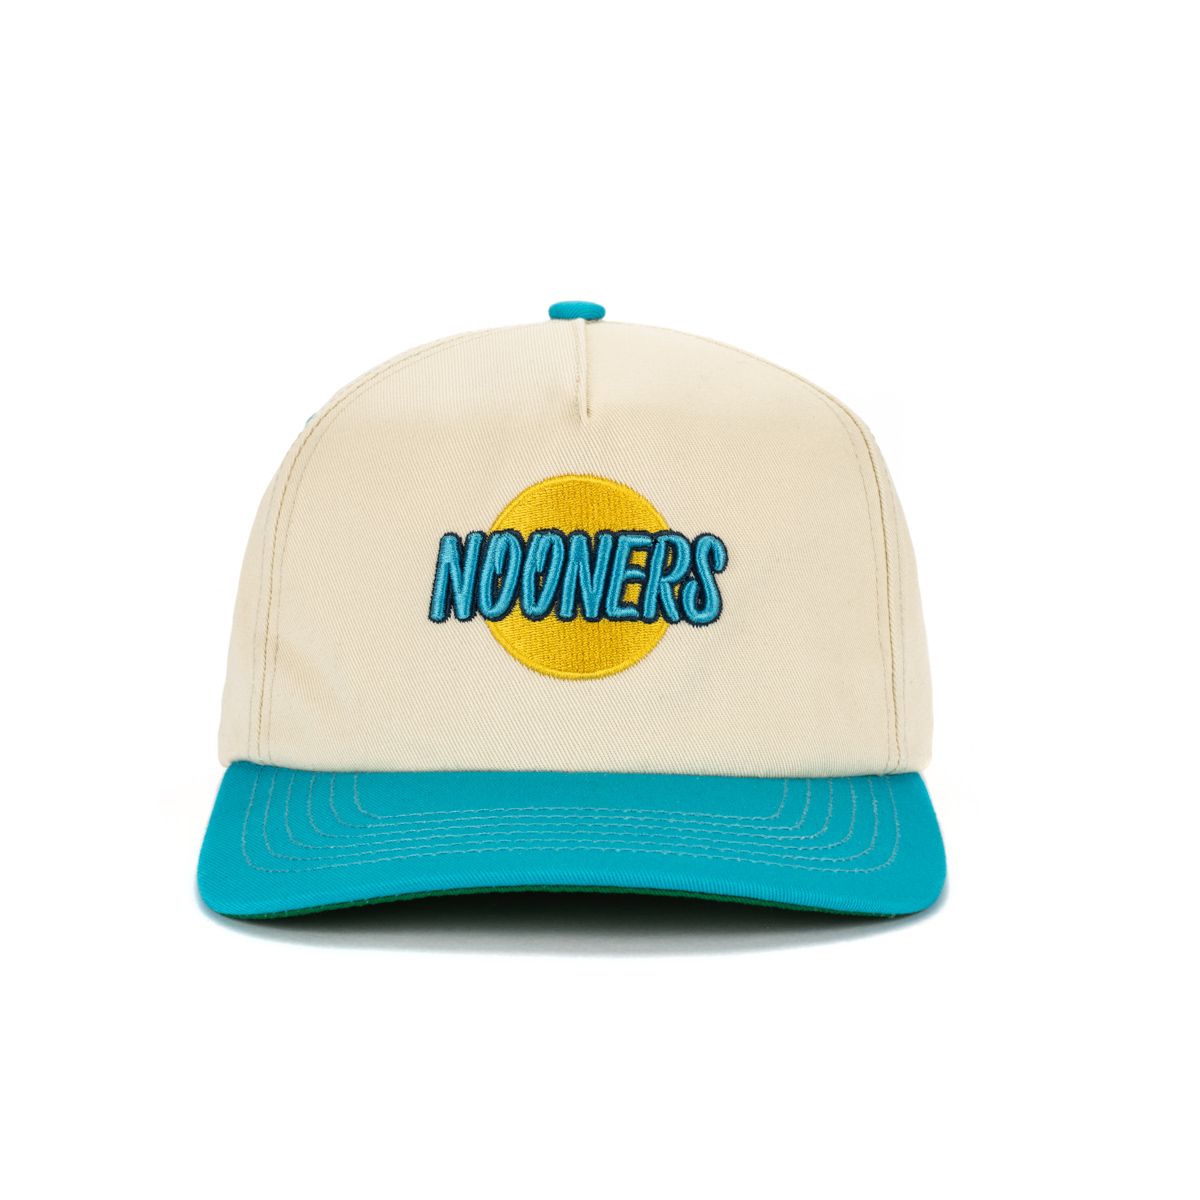 Nooners Retro Hat-Hats-Nooners-Light Blue-One Size-Barstool Sports